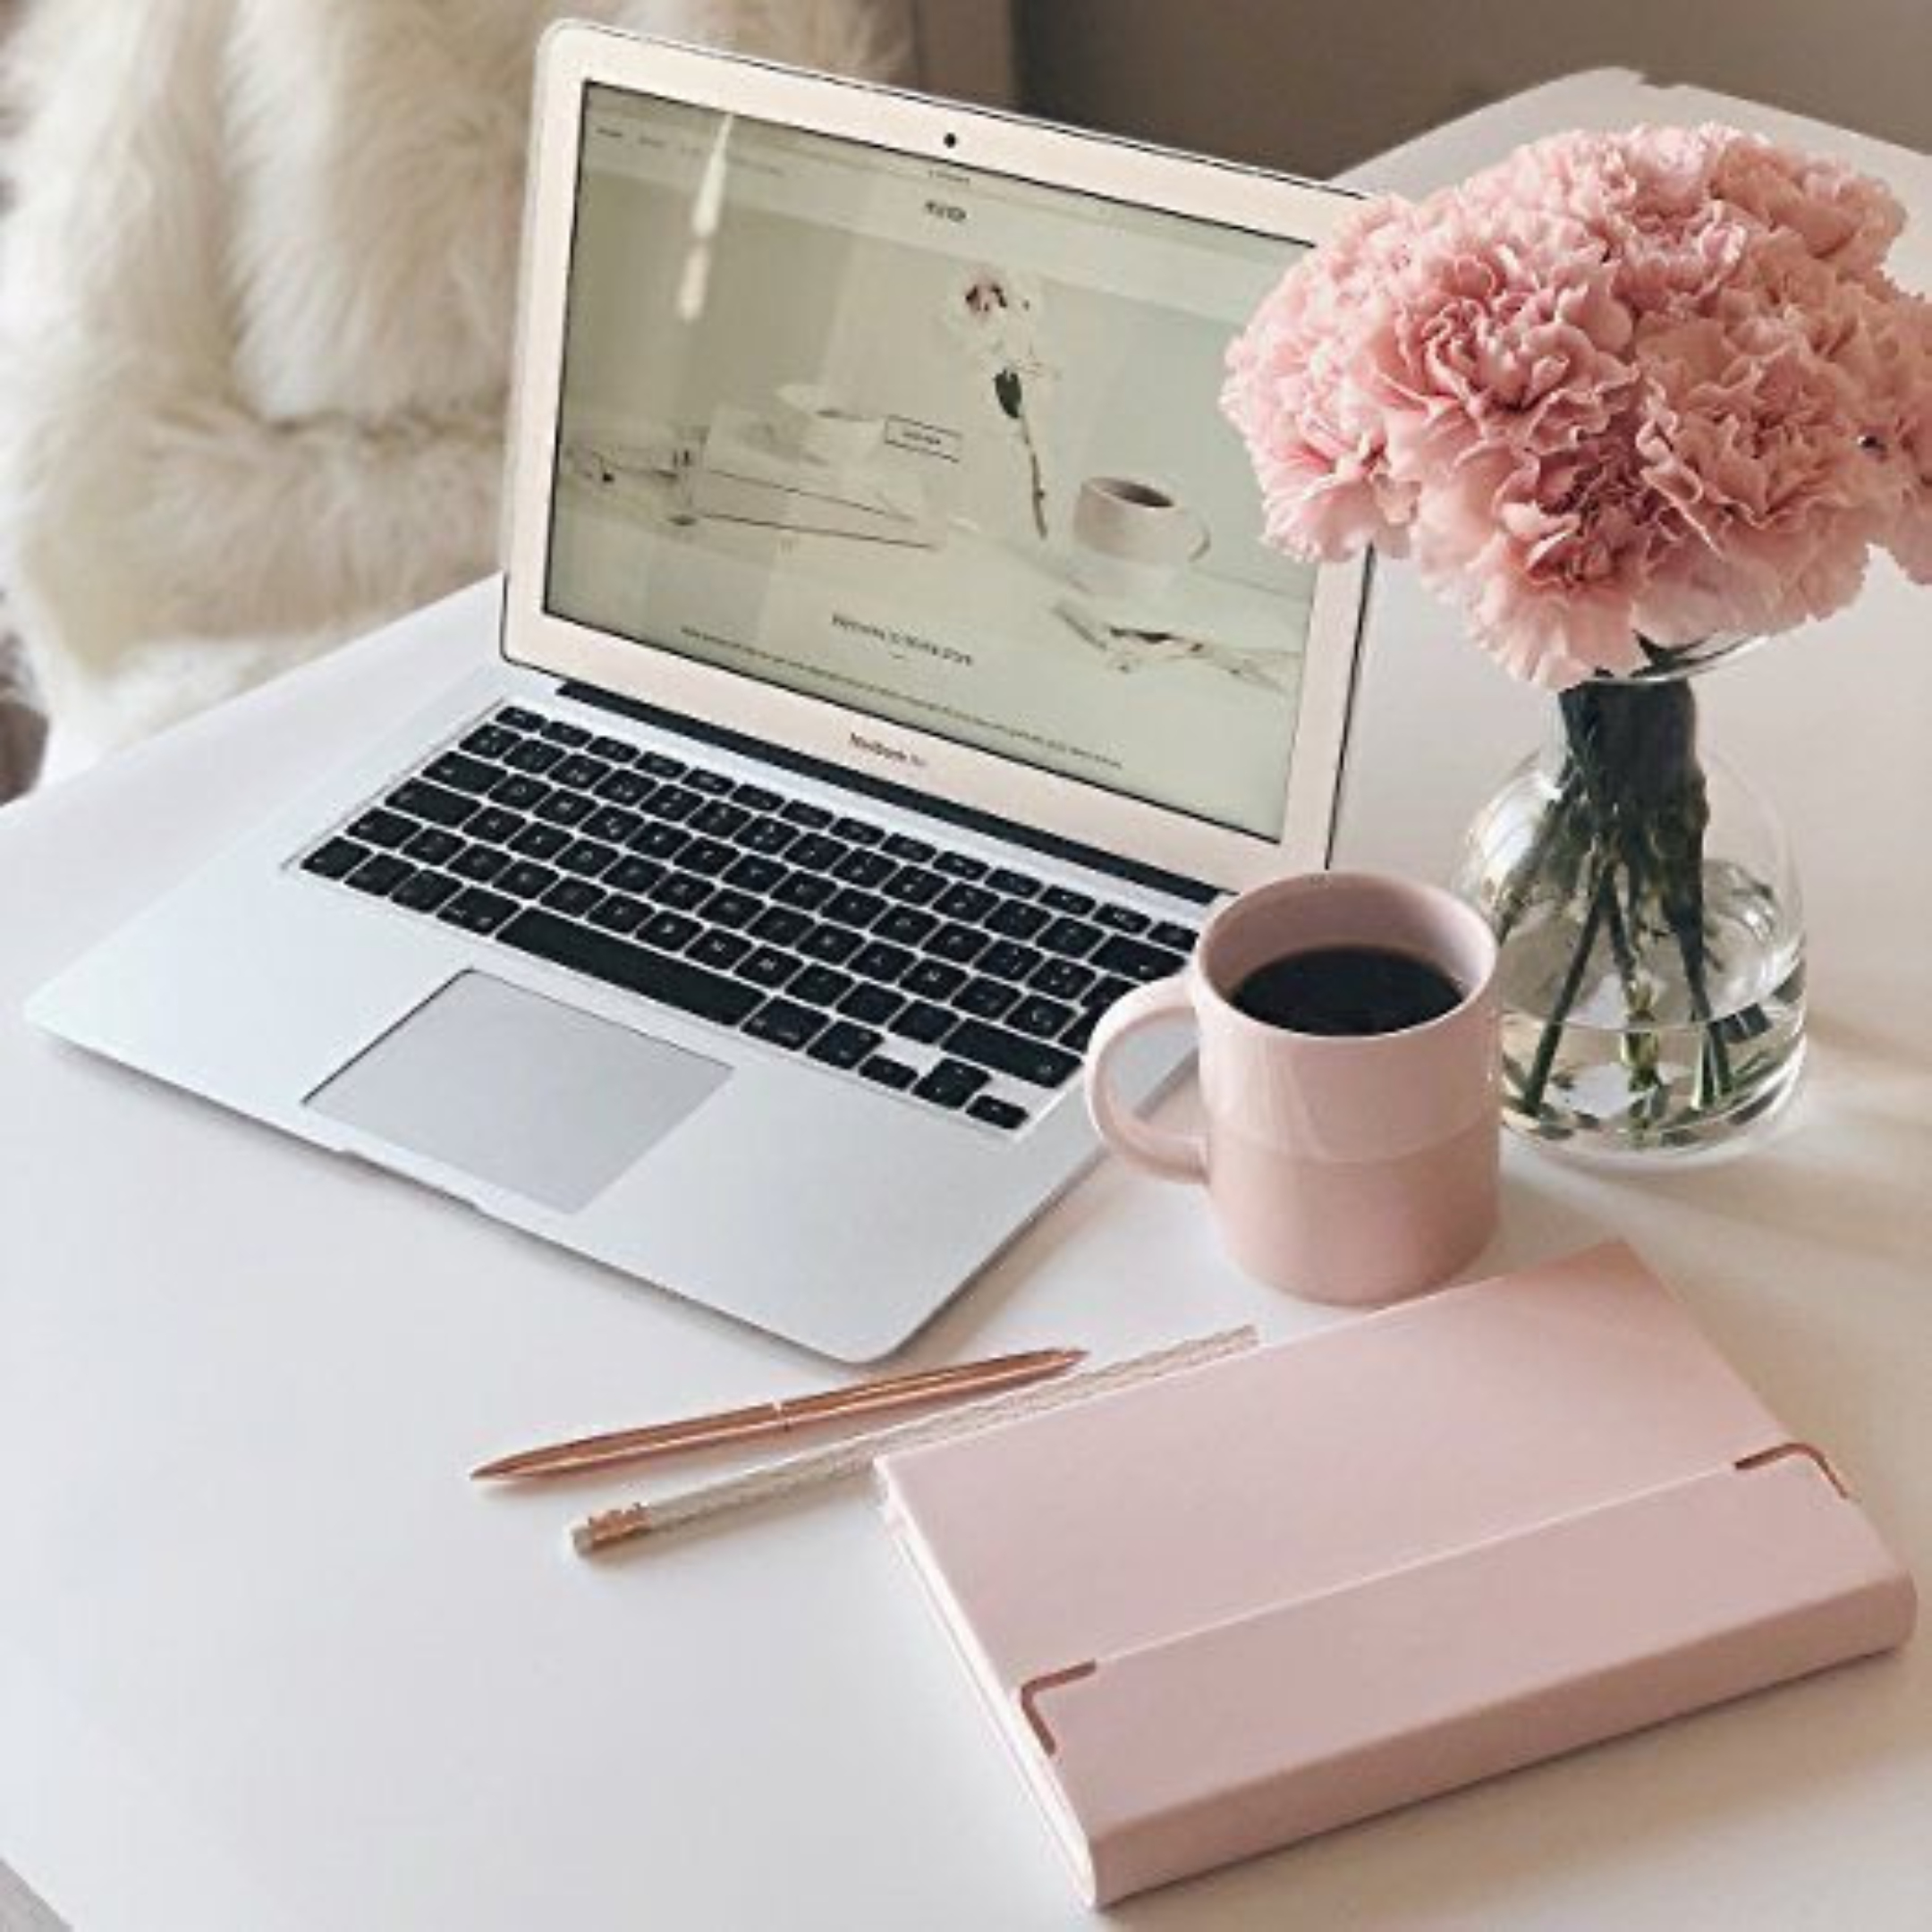 Laptop on desk with flowers and journal